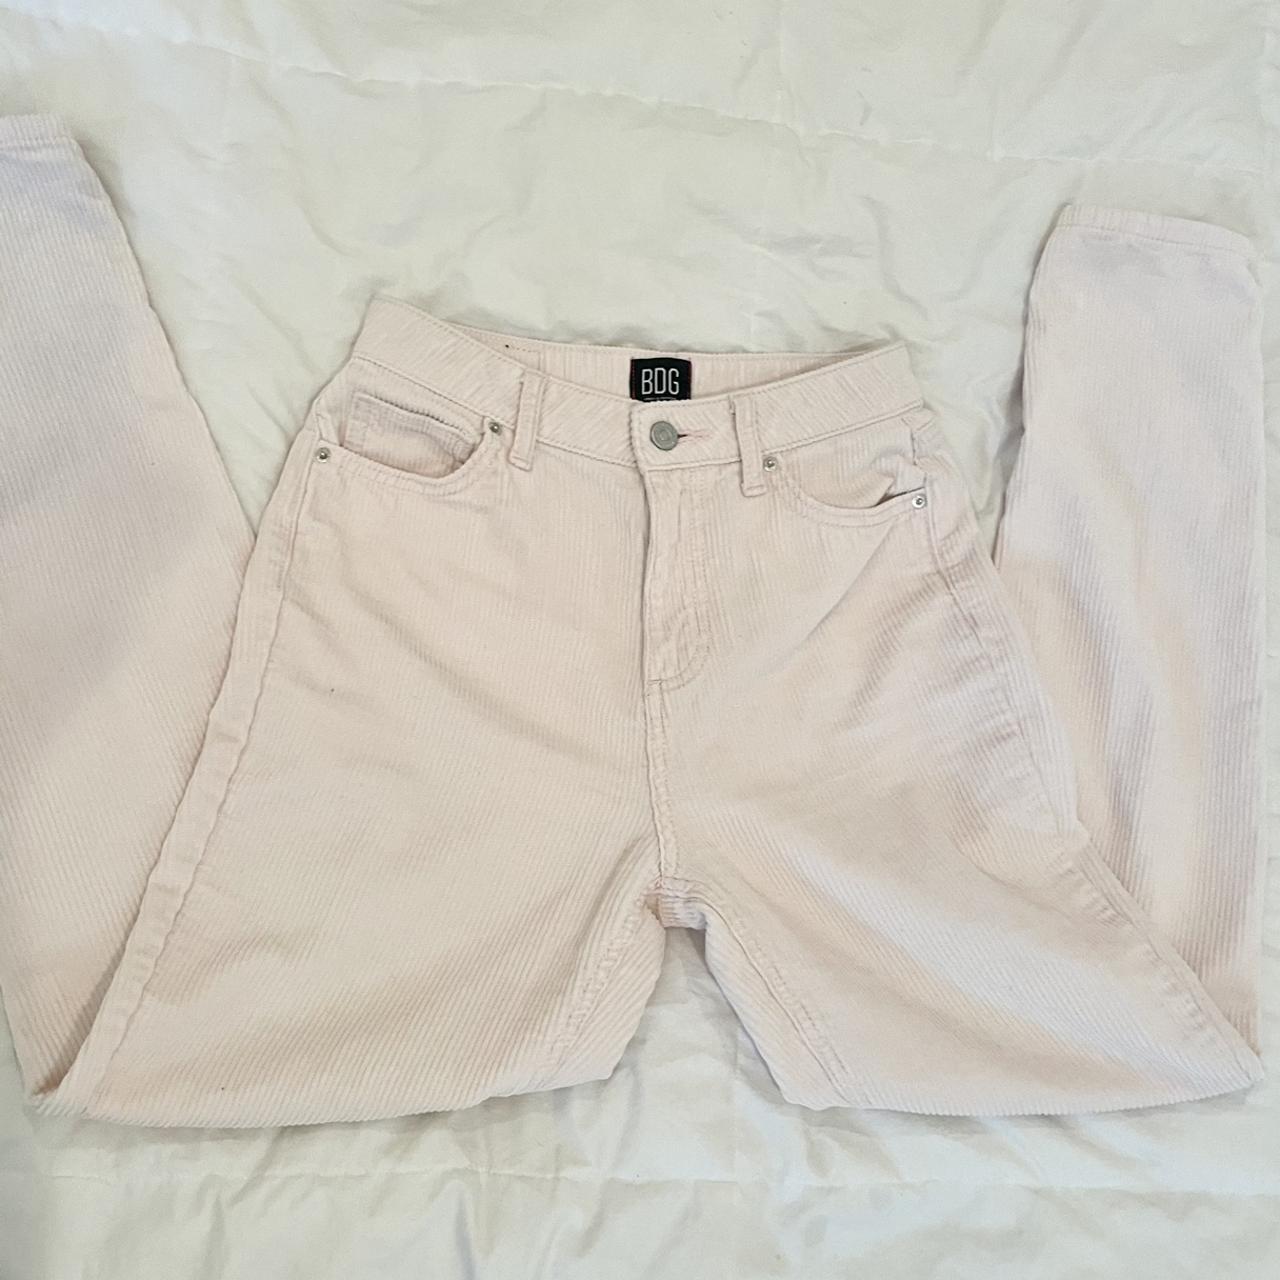 BDG Women's Pink and White Jeans